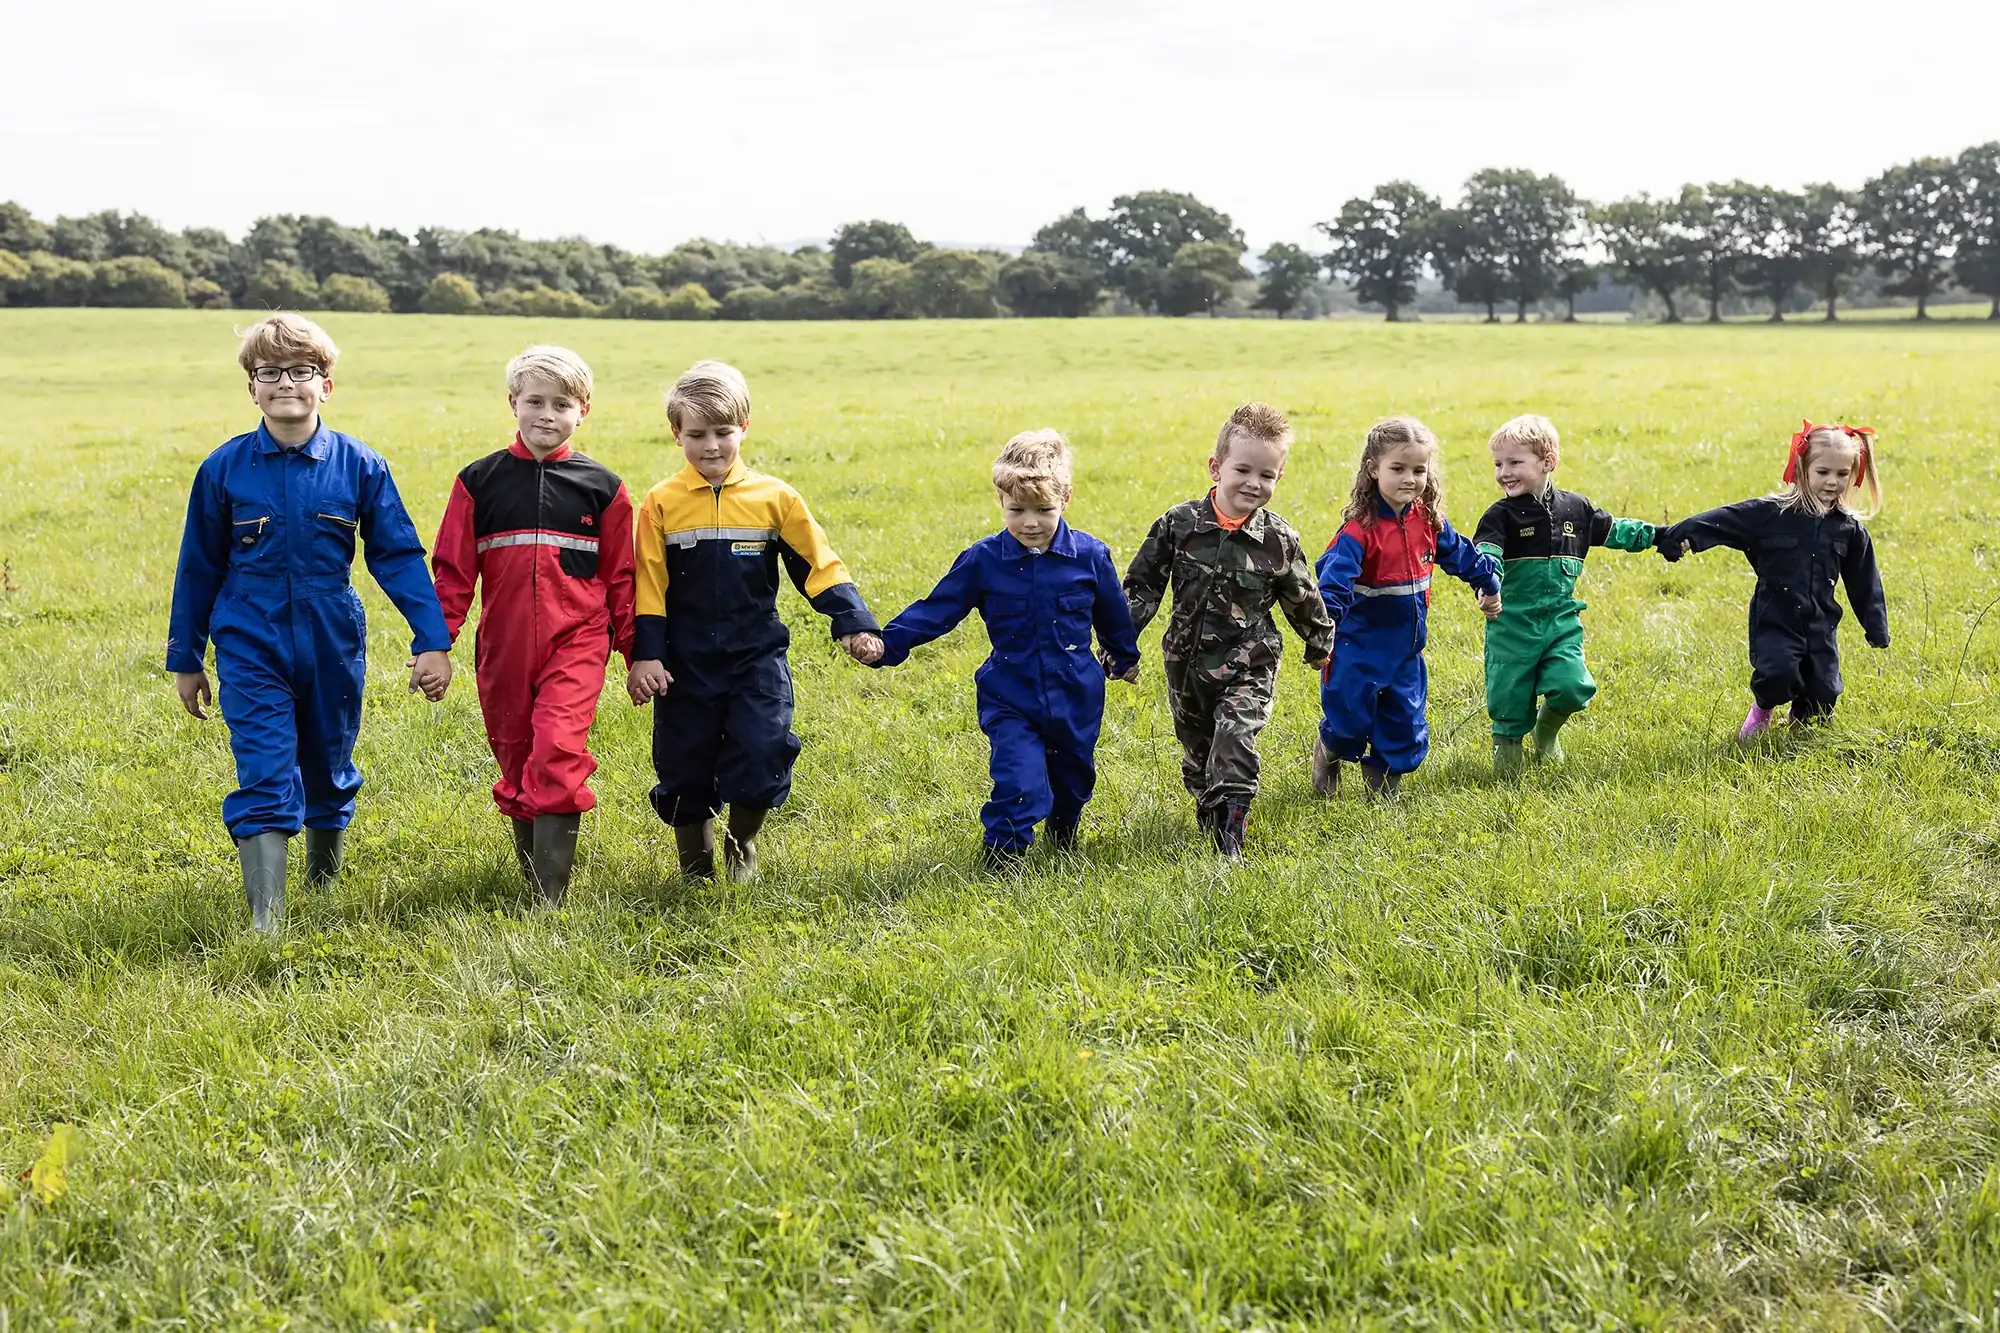 A group of children in colorful overalls and boots hold hands while walking in a grassy field with trees in the background.